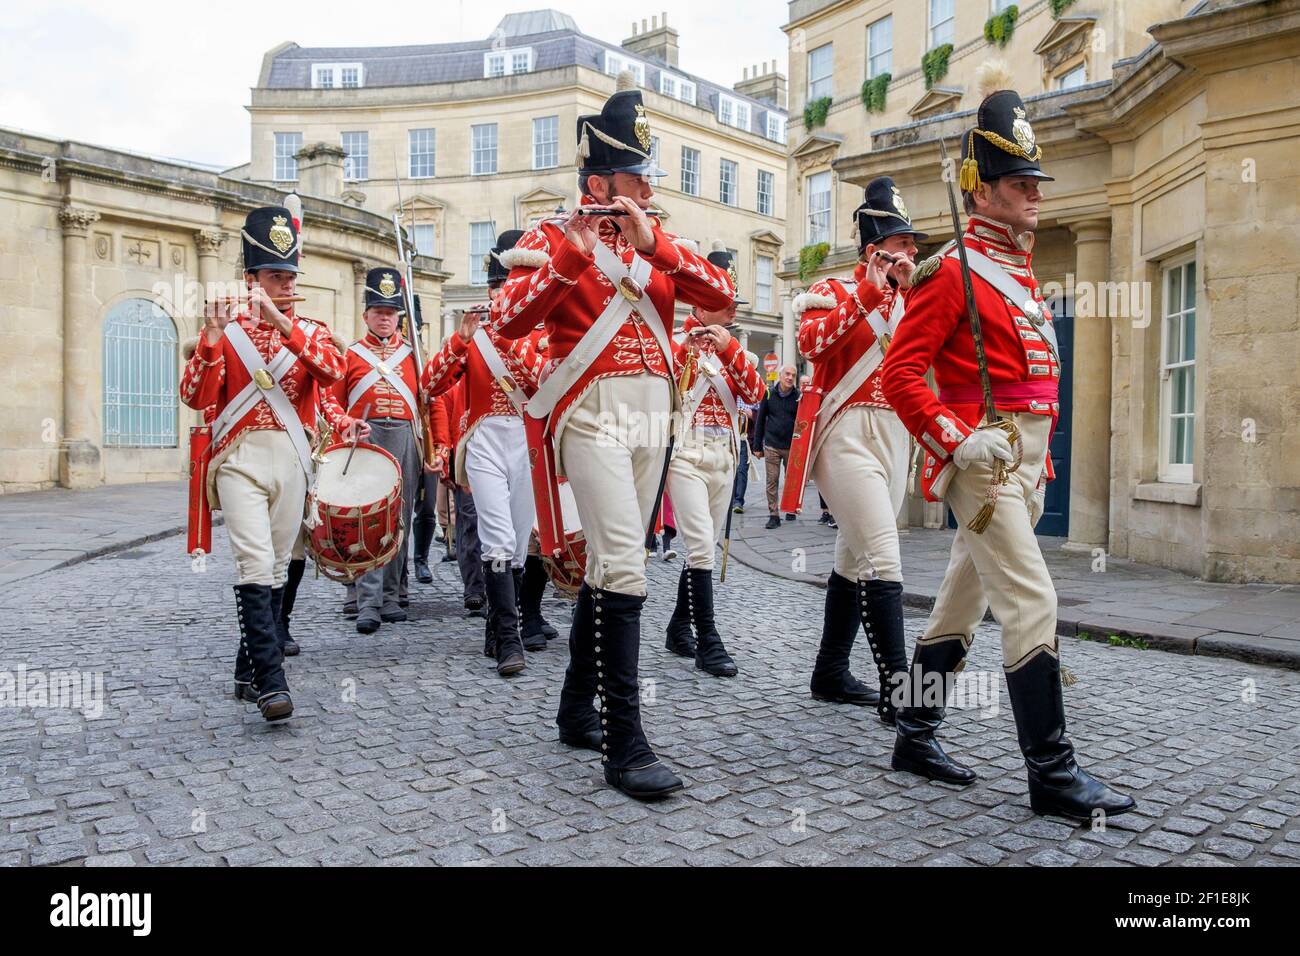 The re-enactment group,His Majesty's 33rd Regiment of Foot are pictured as they take part in the Jane Austen Grand Regency Costumed Promenade 15/09/18 Stock Photo